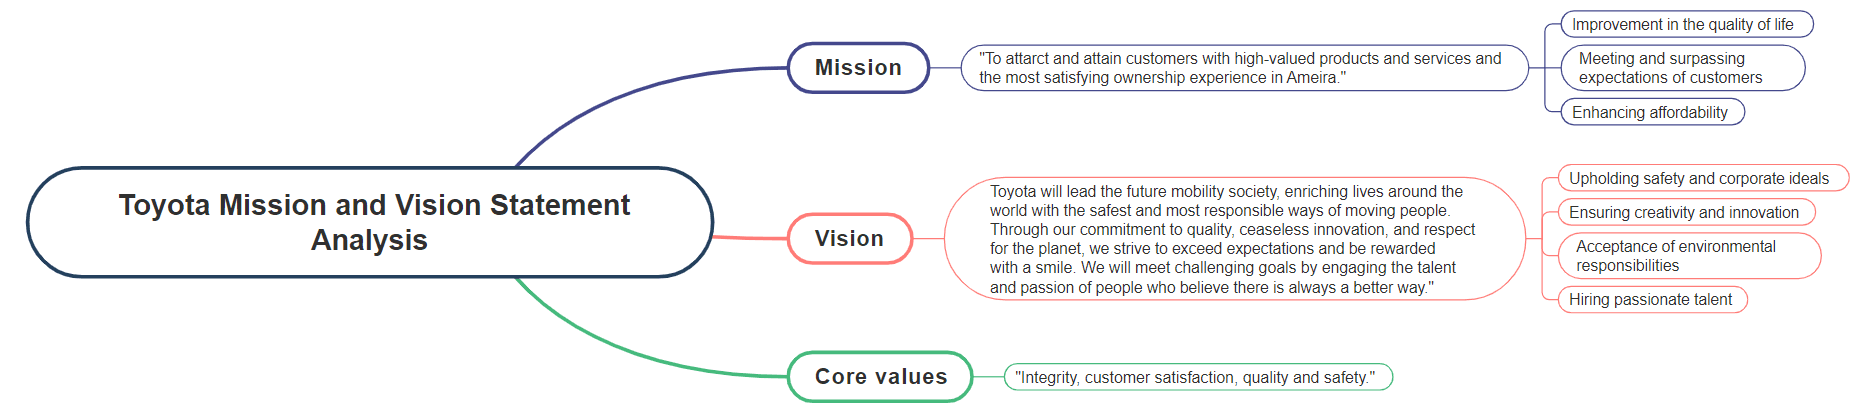 toyota mission and vision statement analysis mind map